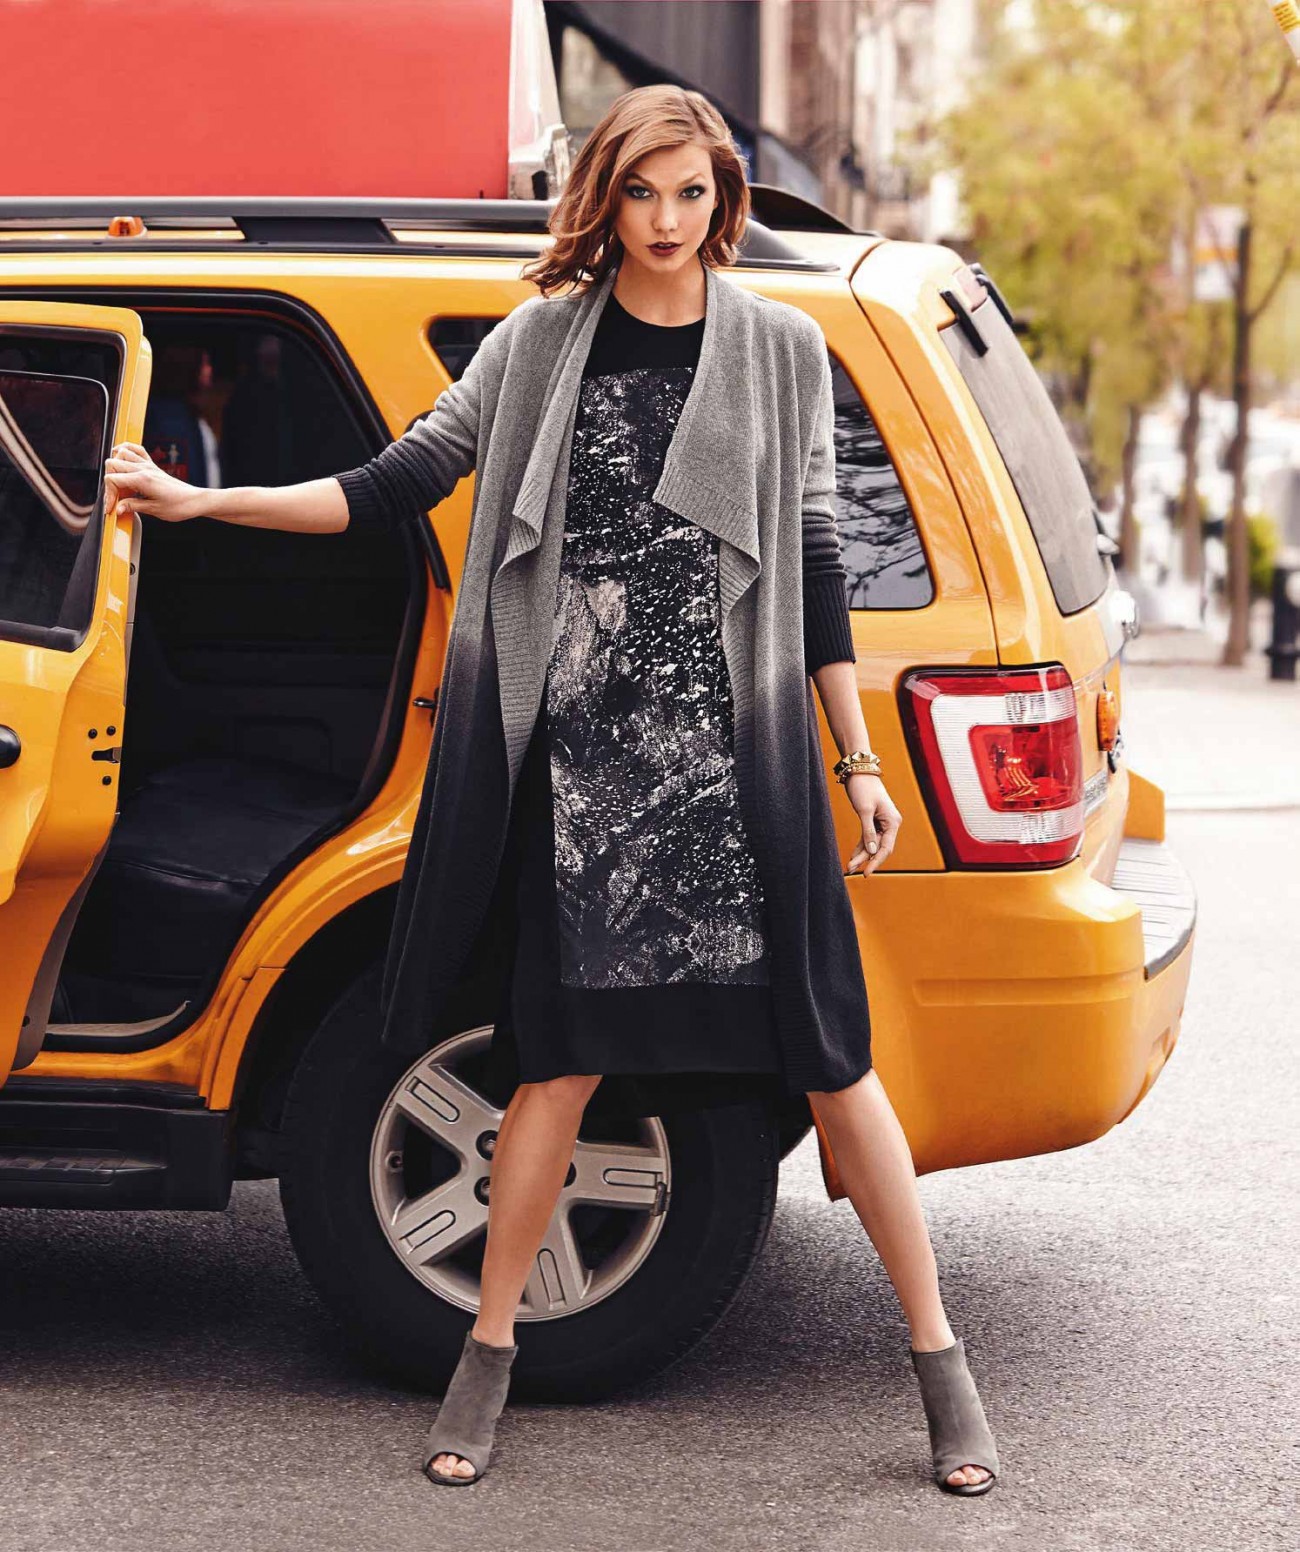 Karlie-Kloss-by-Walter-Chin-for-Neiman-Marcus-the-October-Book-2014_01.jpg